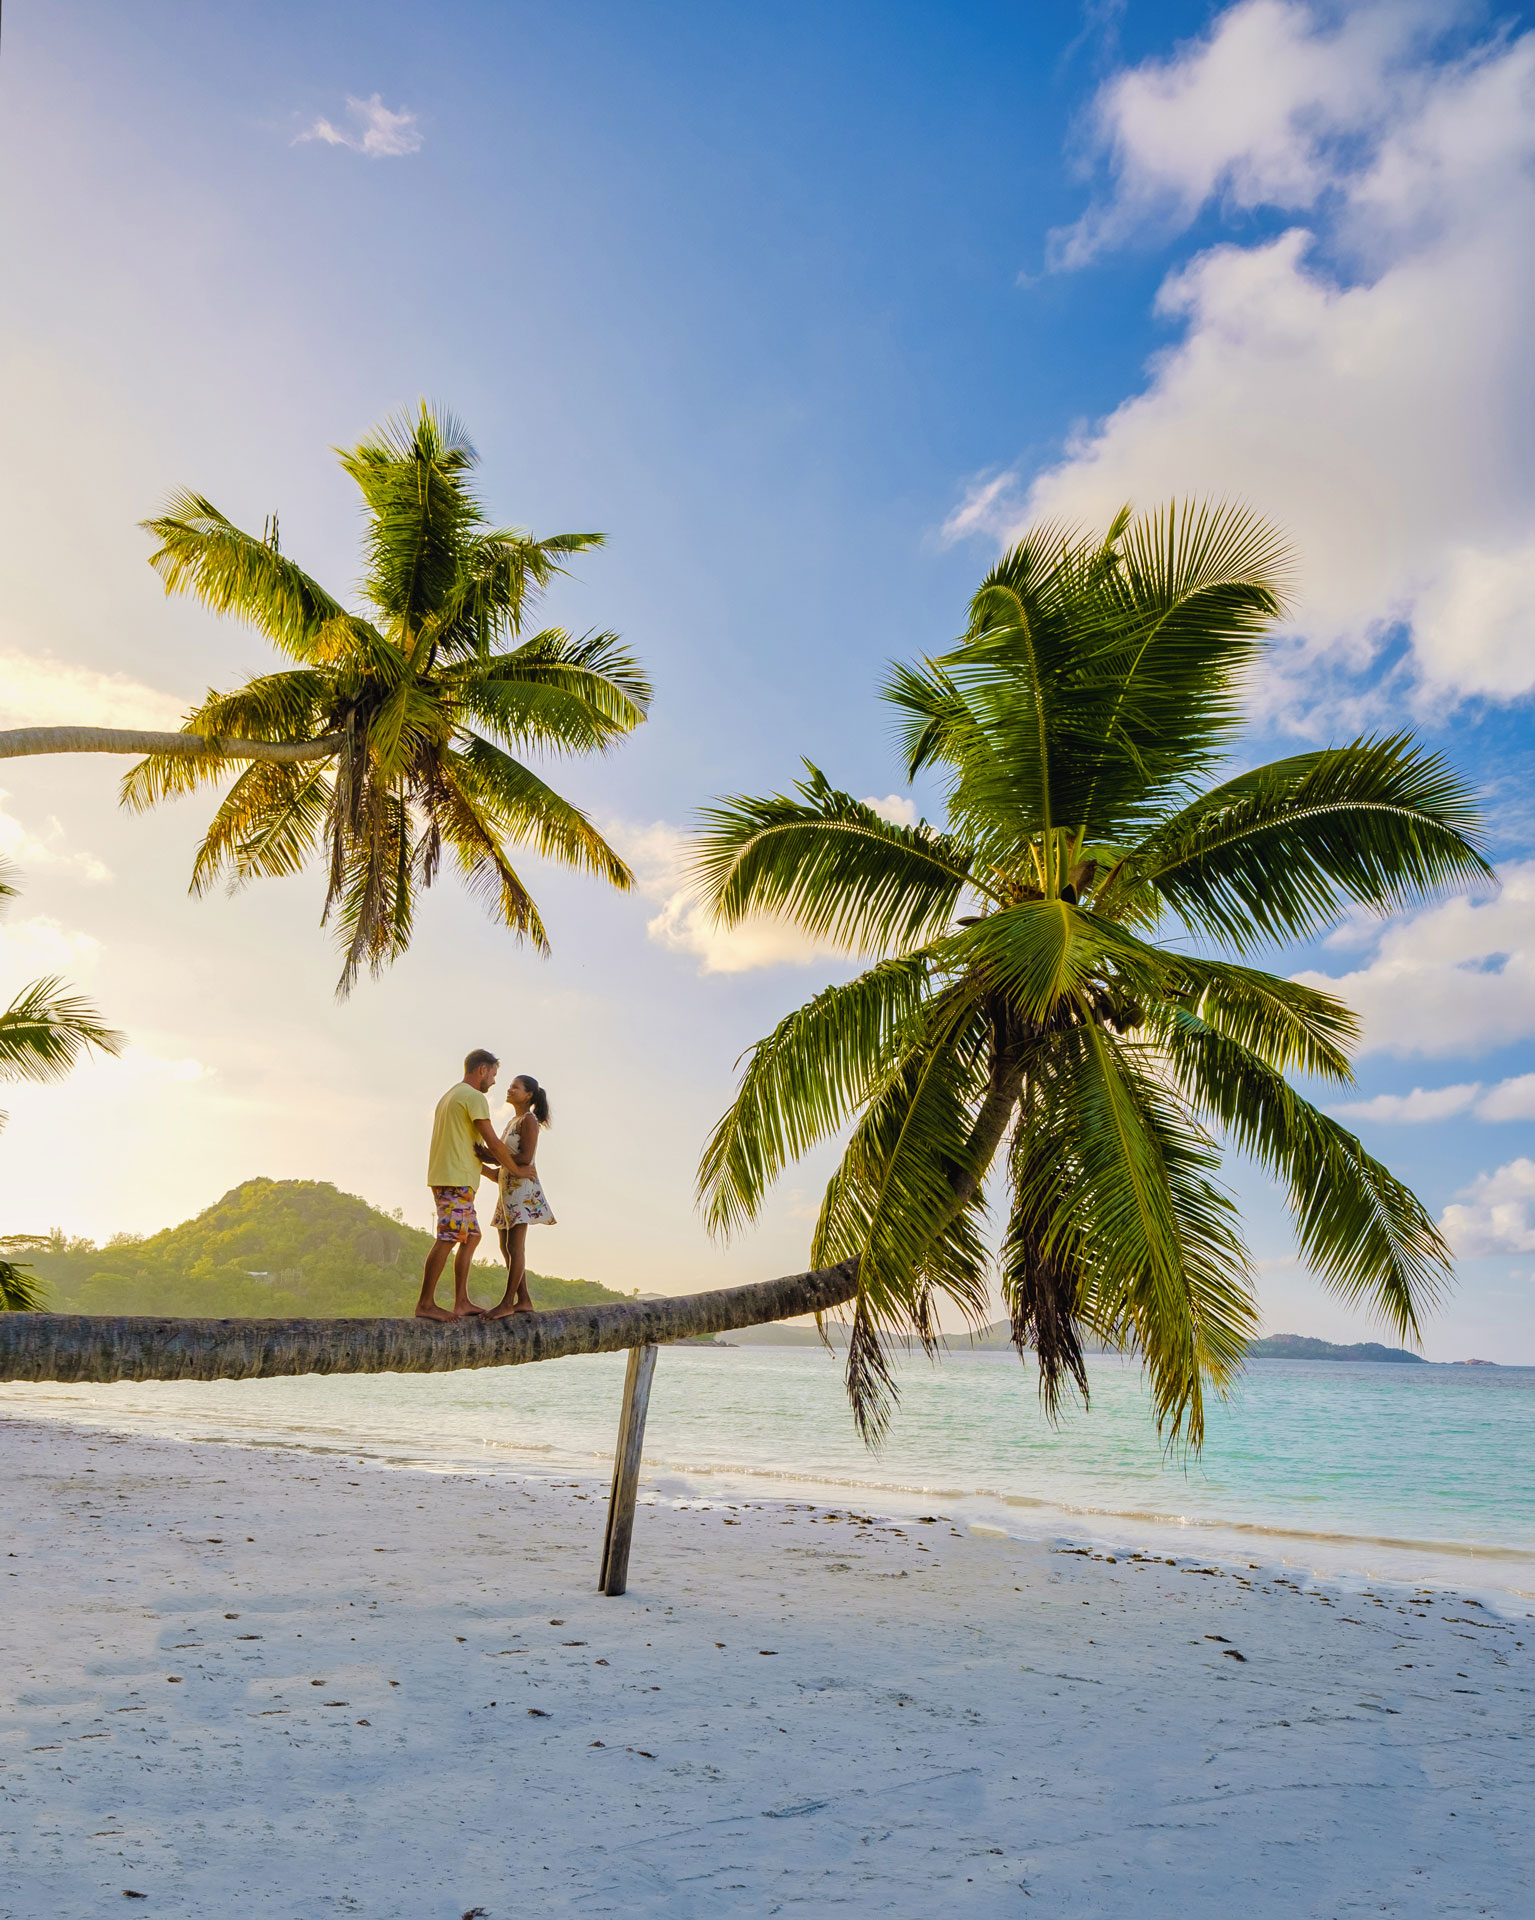 praslin seychelles tropical island with withe beaches palm trees couple men woman hammock